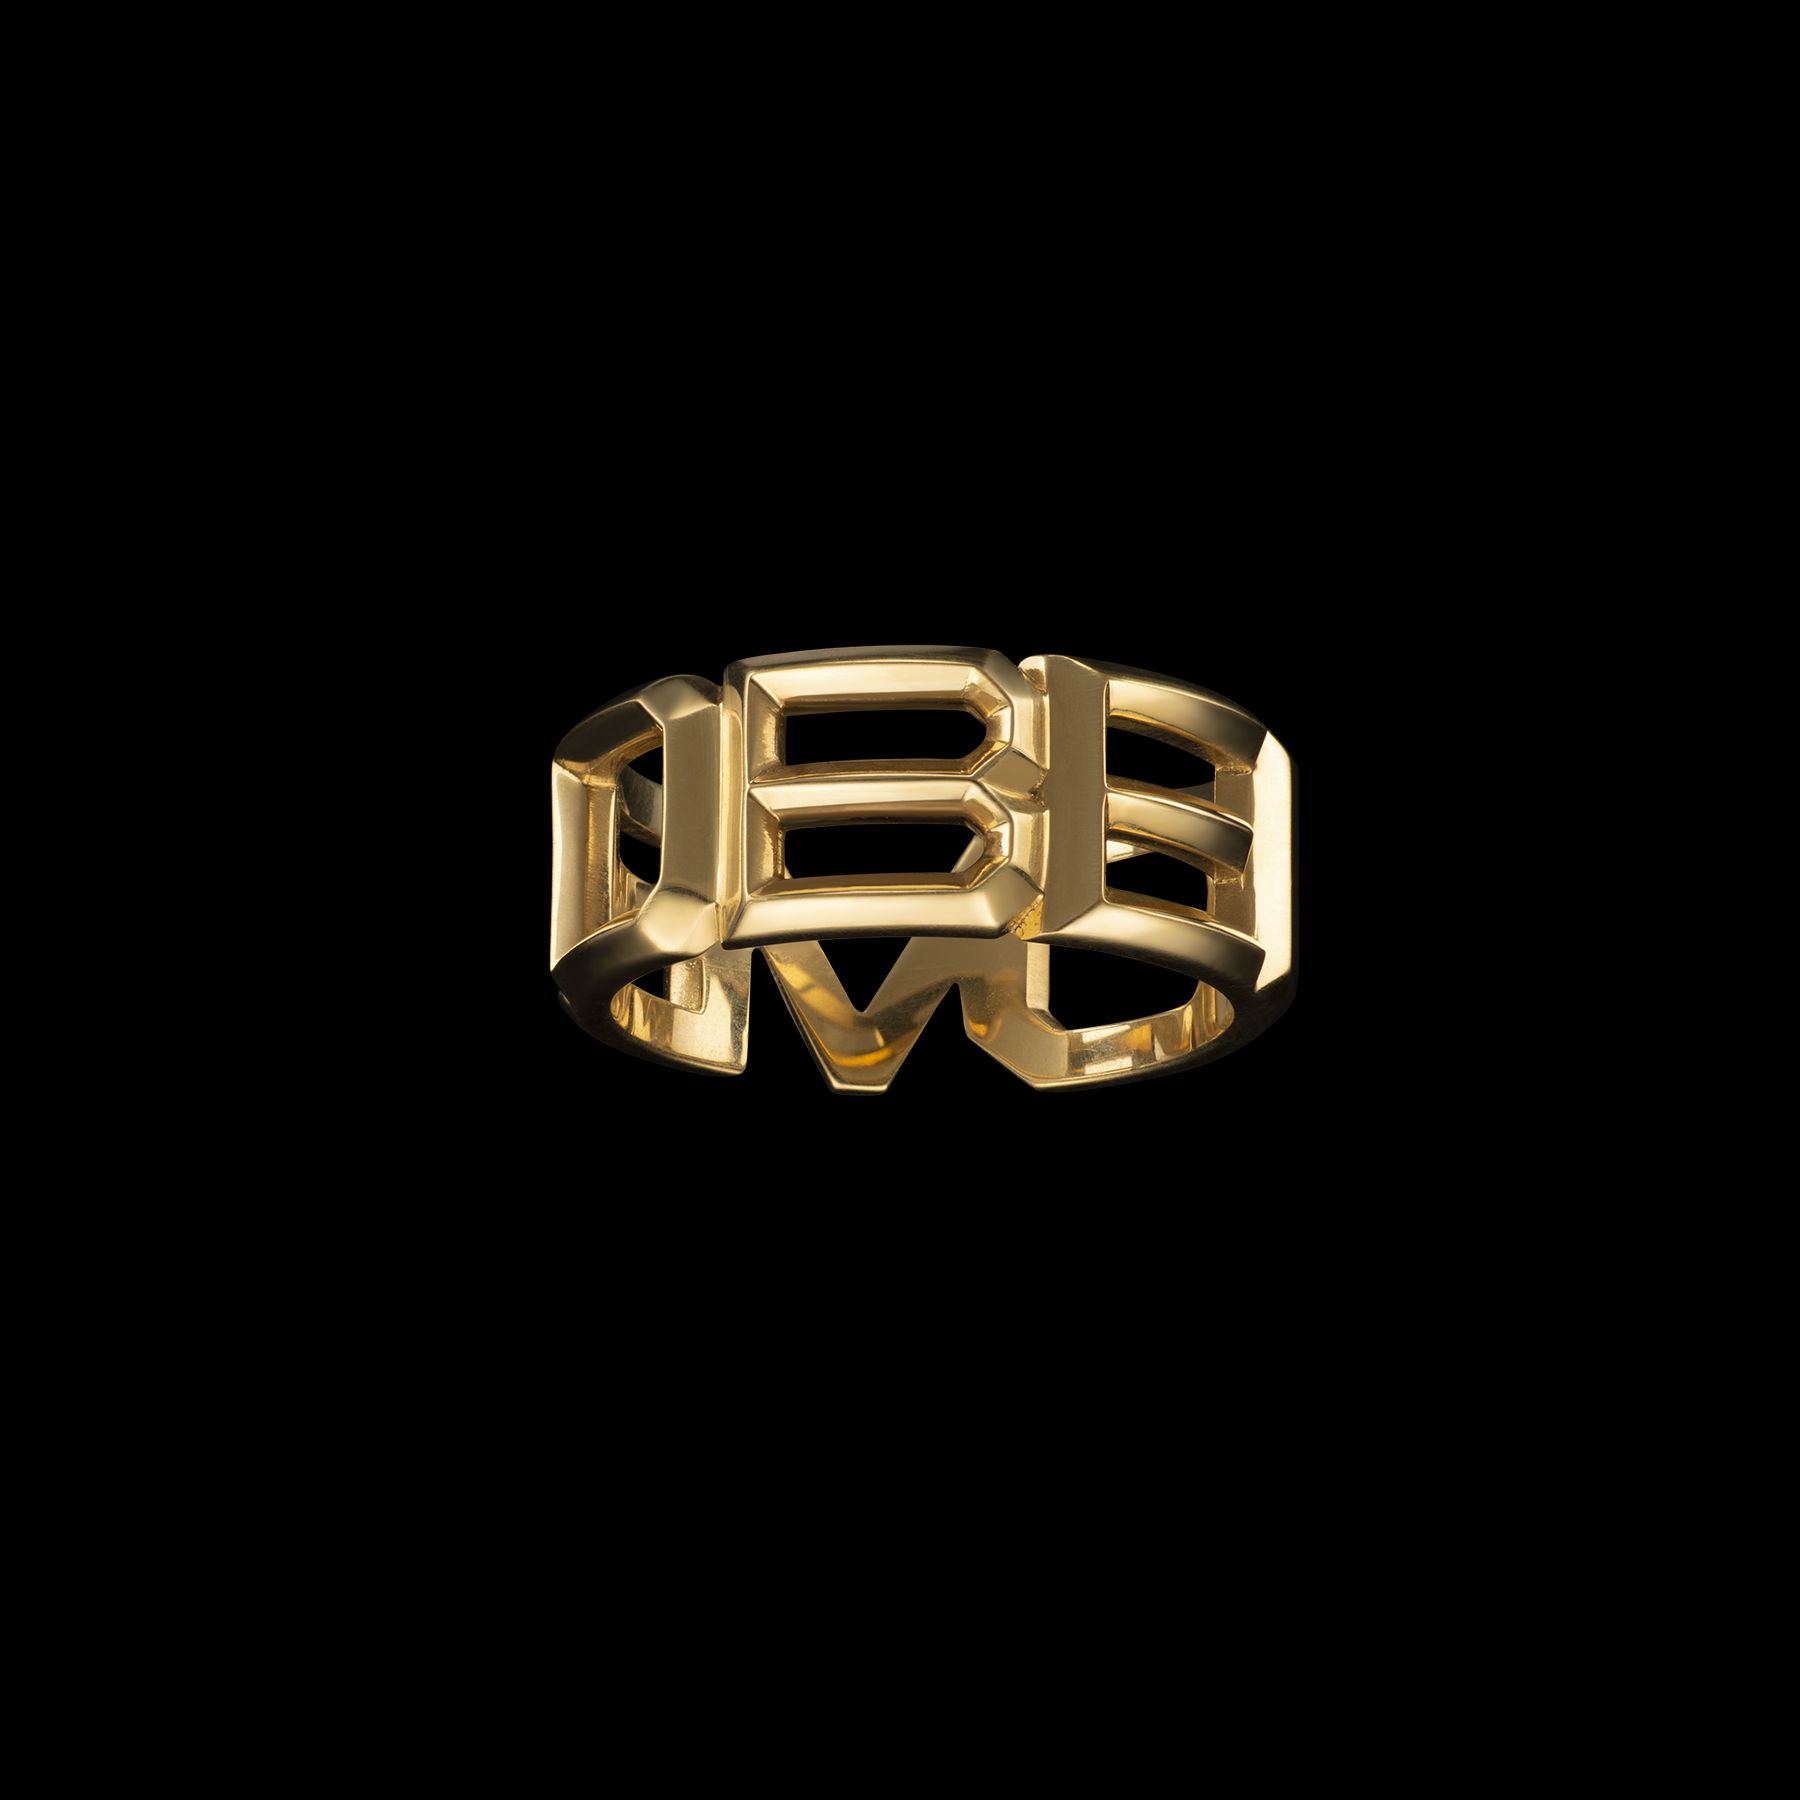 The ‘BELOVED’ ring by designer Solange Azagury-Partridge - 18 karat yellow gold form - front view 0